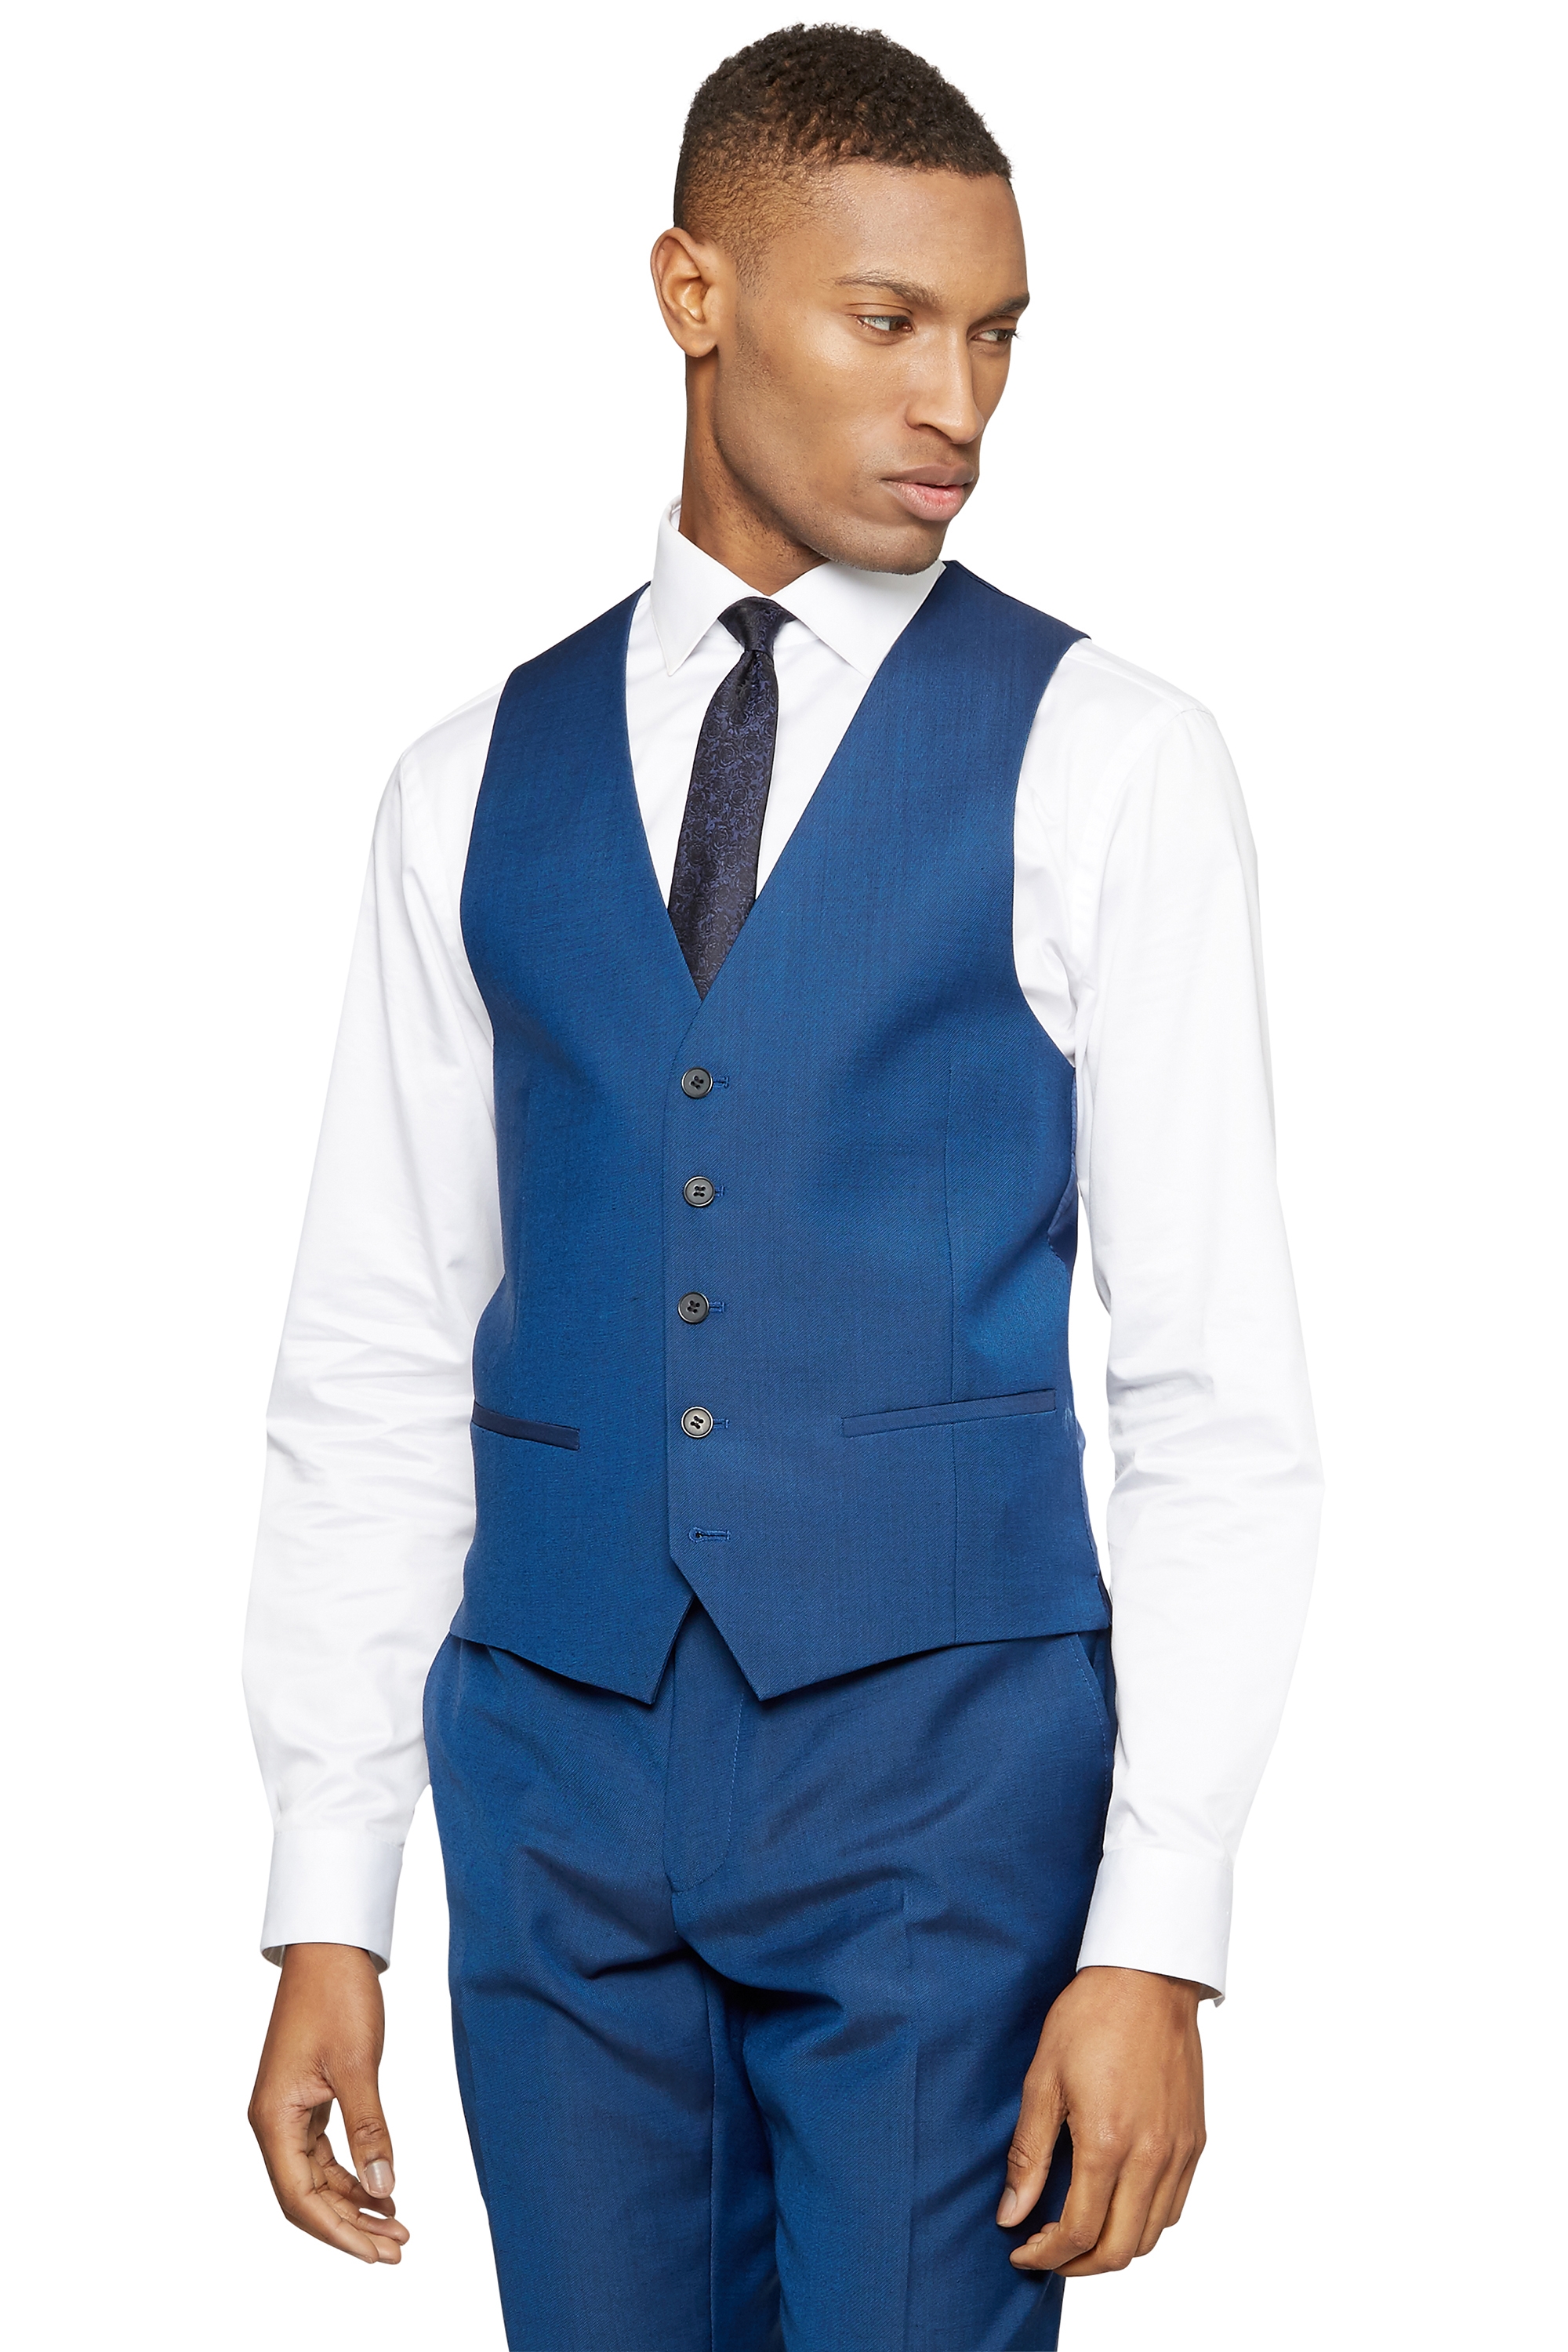 DKNY Slim Fit Electric Blue Tonic Twill Waistcoat | Buy Online at Moss